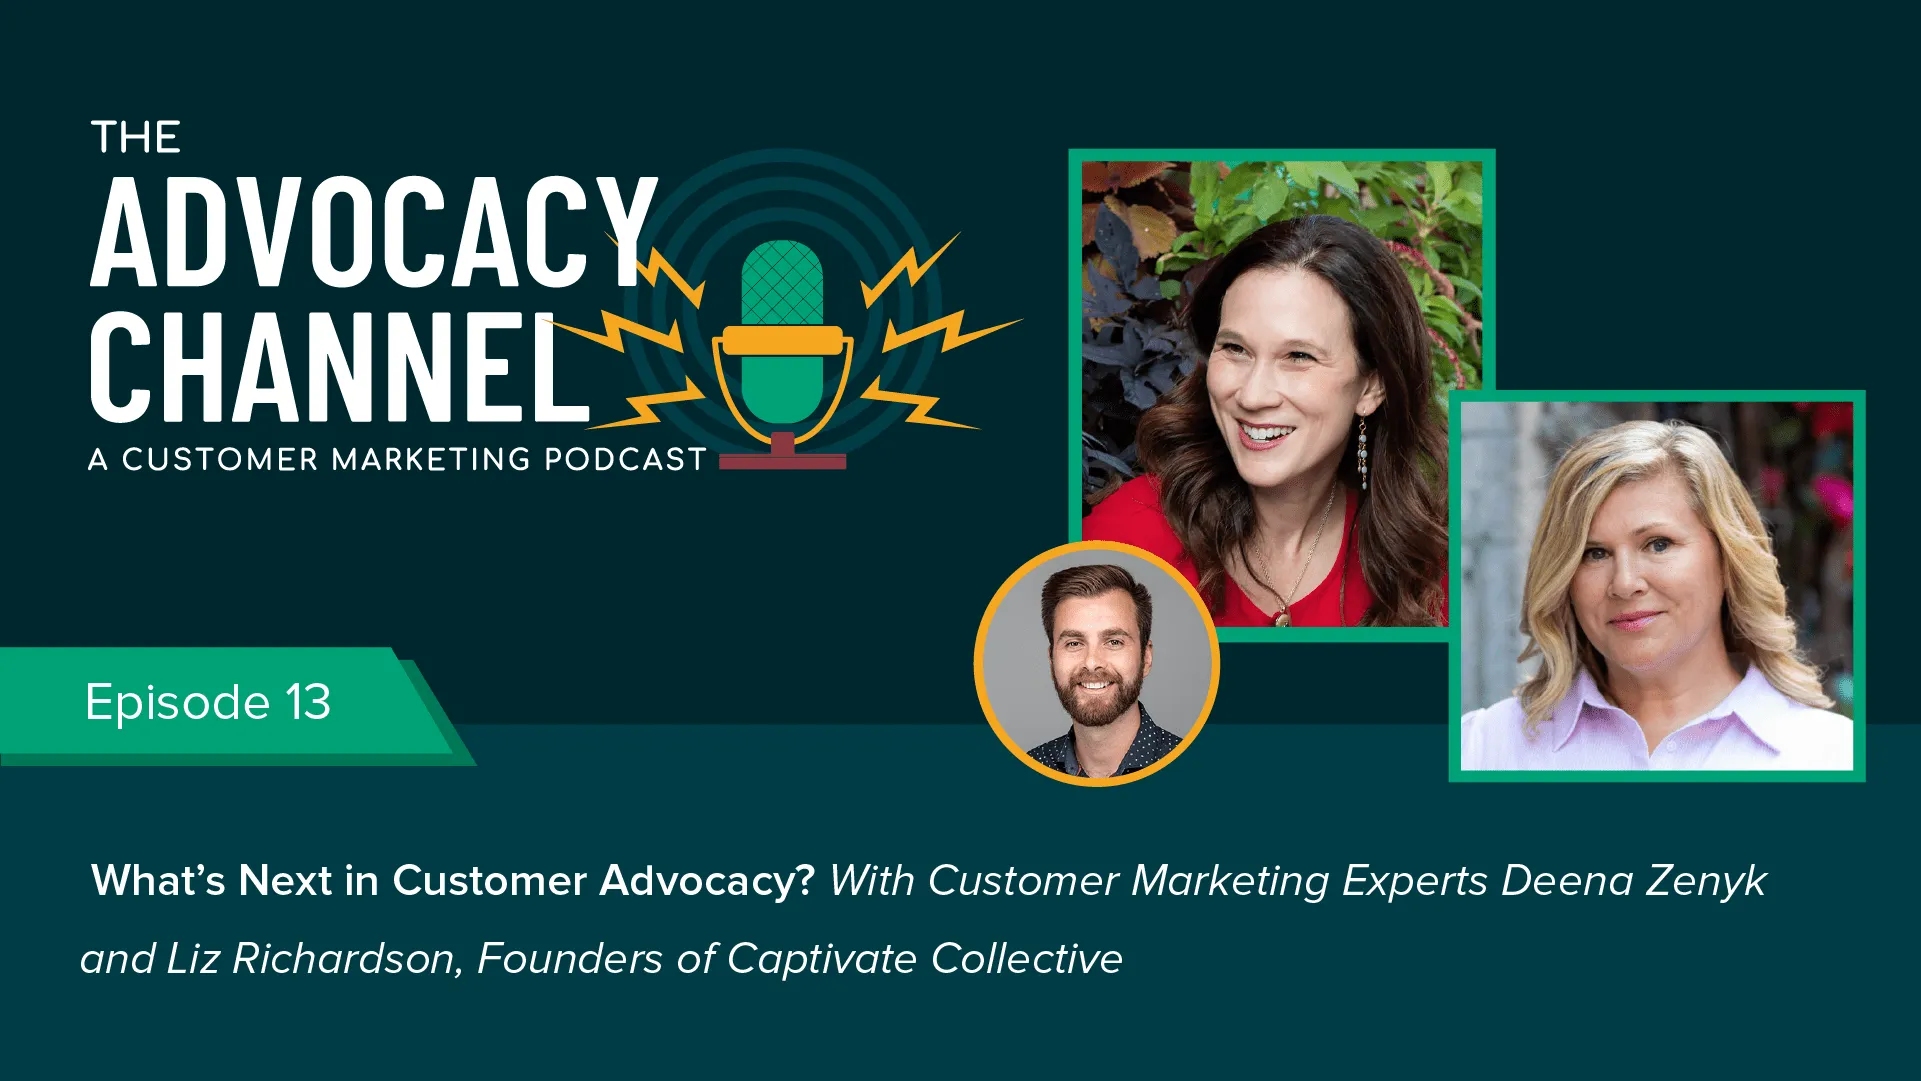 Deena and Liz from Captivate Collective on The Advocacy Channel Podcast